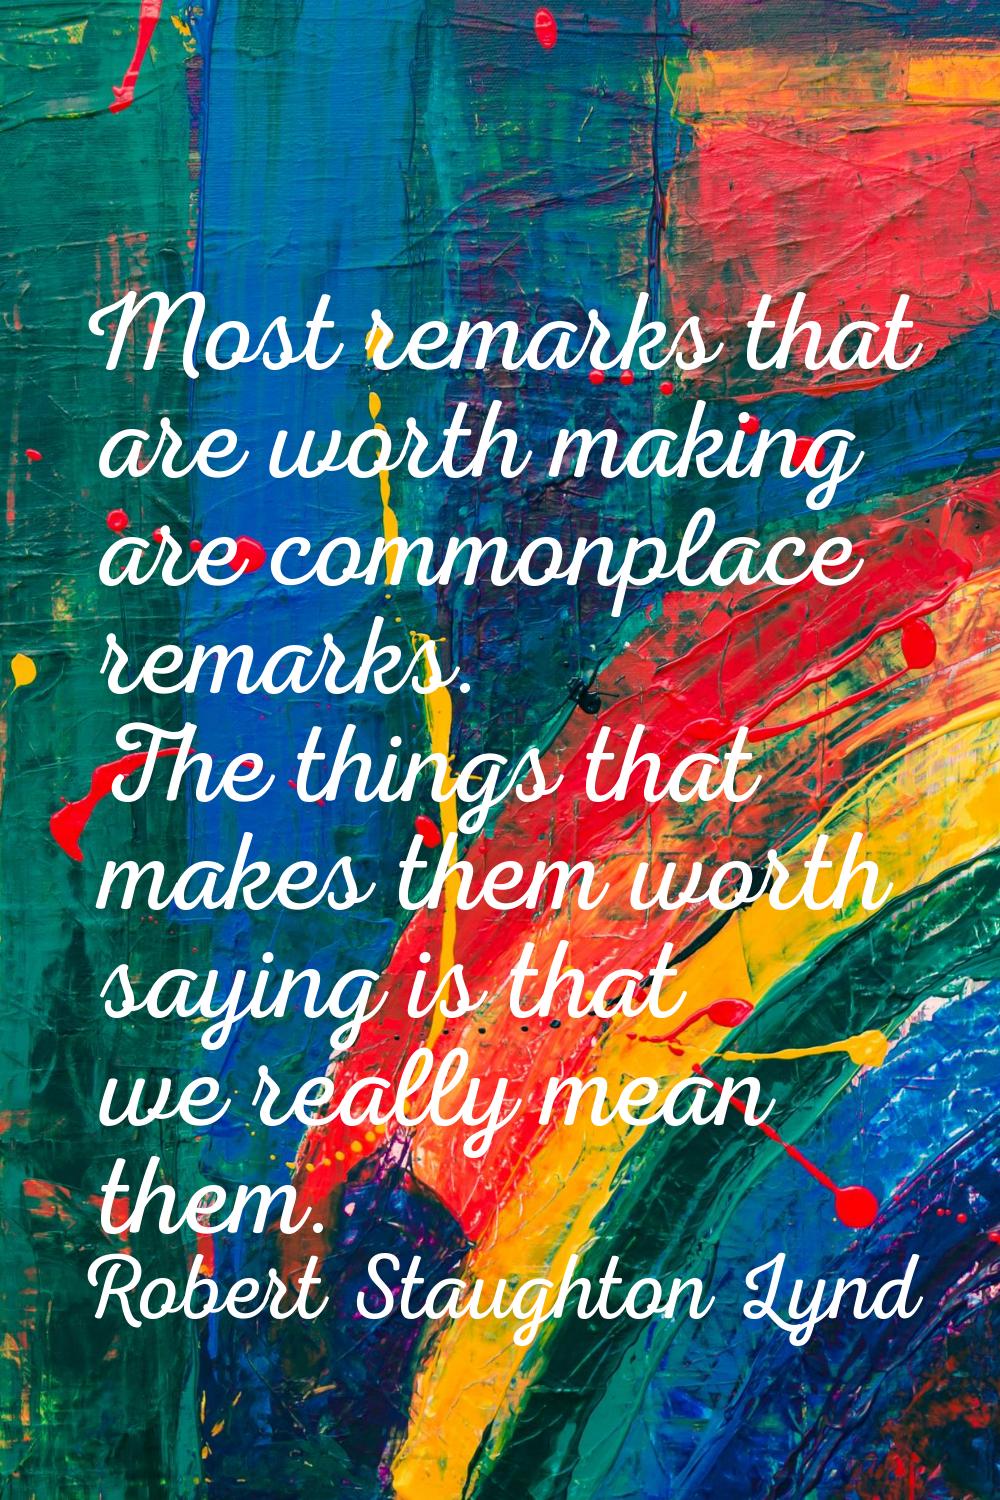 Most remarks that are worth making are commonplace remarks. The things that makes them worth saying